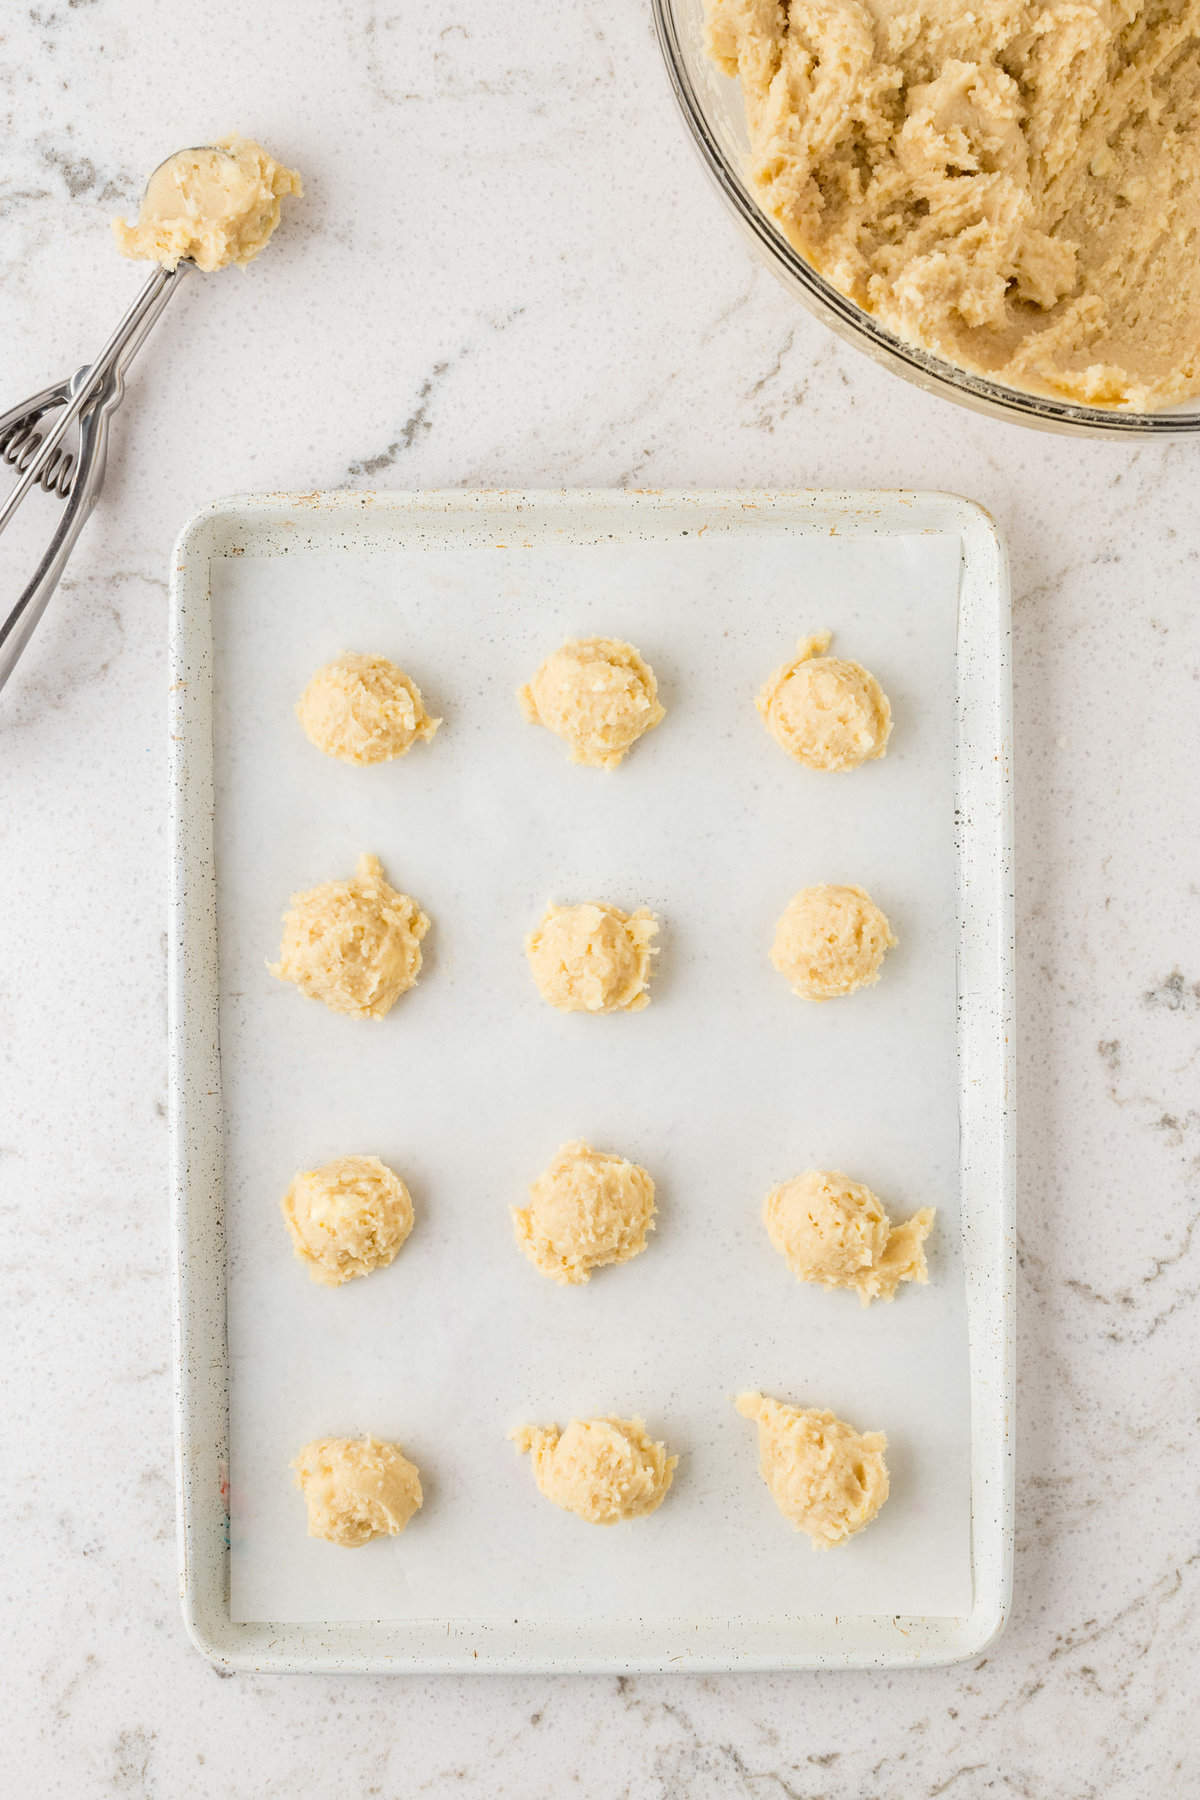 Once chilled use a 1 teaspoon cookie scoop to form small dough balls. Place them 2 inches apart and bake.